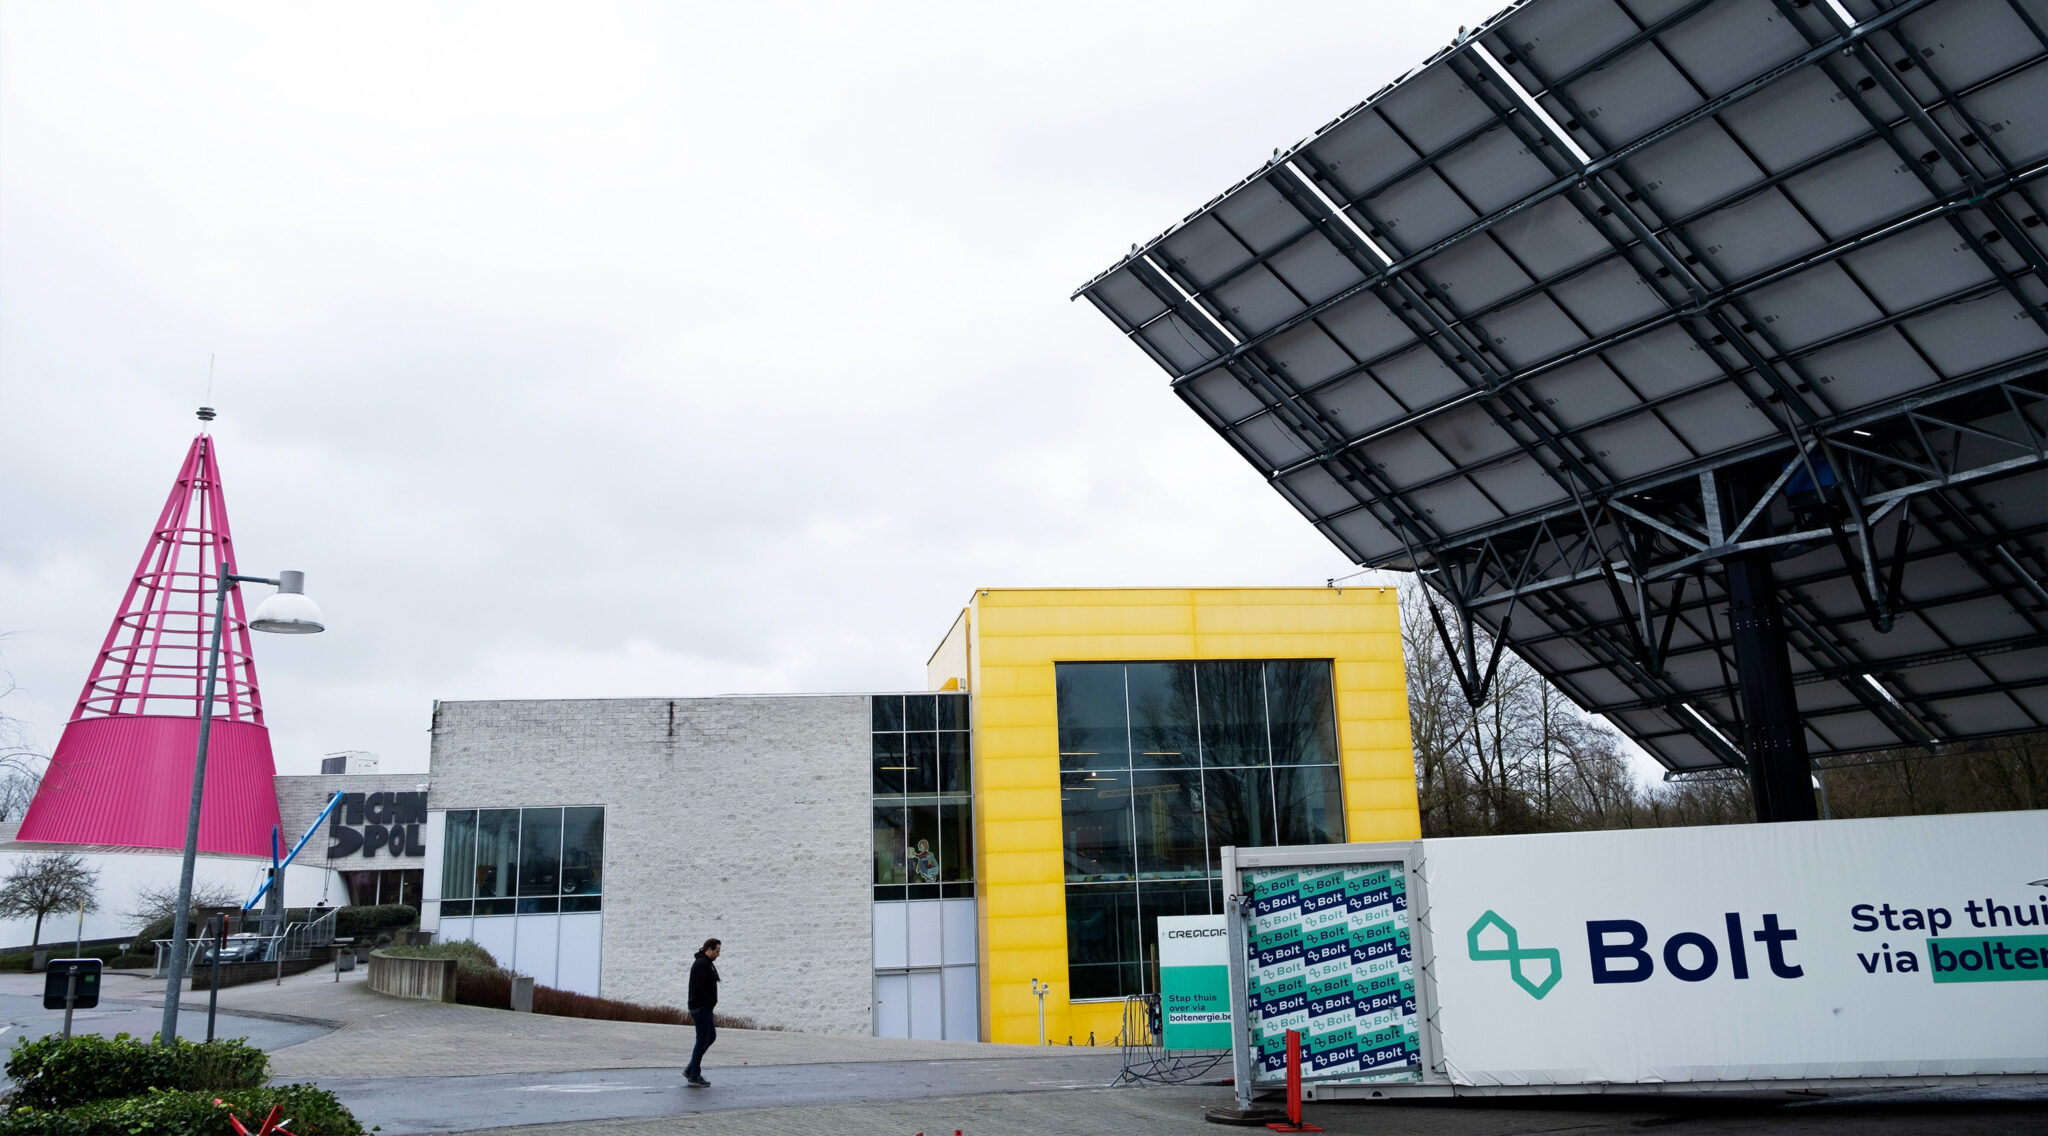 The biggest mobile solar panel installation in the world created by Creacar seen at Technopolis Mechelen